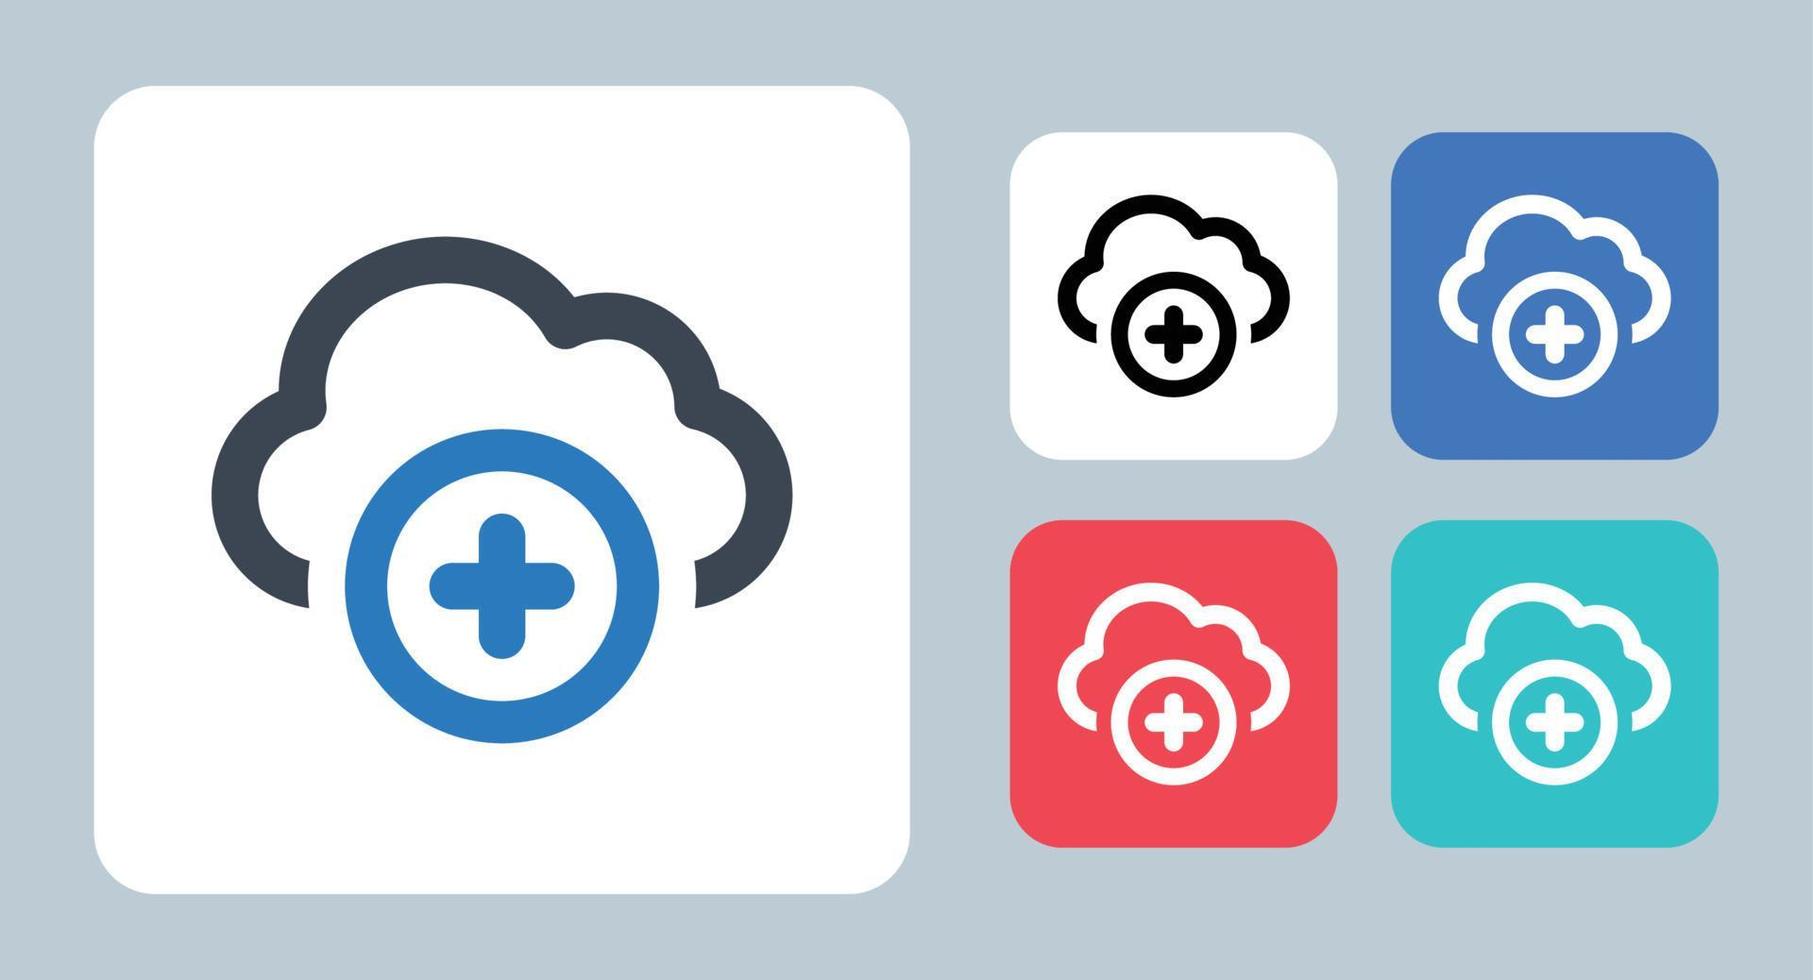 Add Cloud icon - vector illustration . Cloud, New, Add, Data, Create, Storage, Plus, network, server, line, outline, flat, icons .